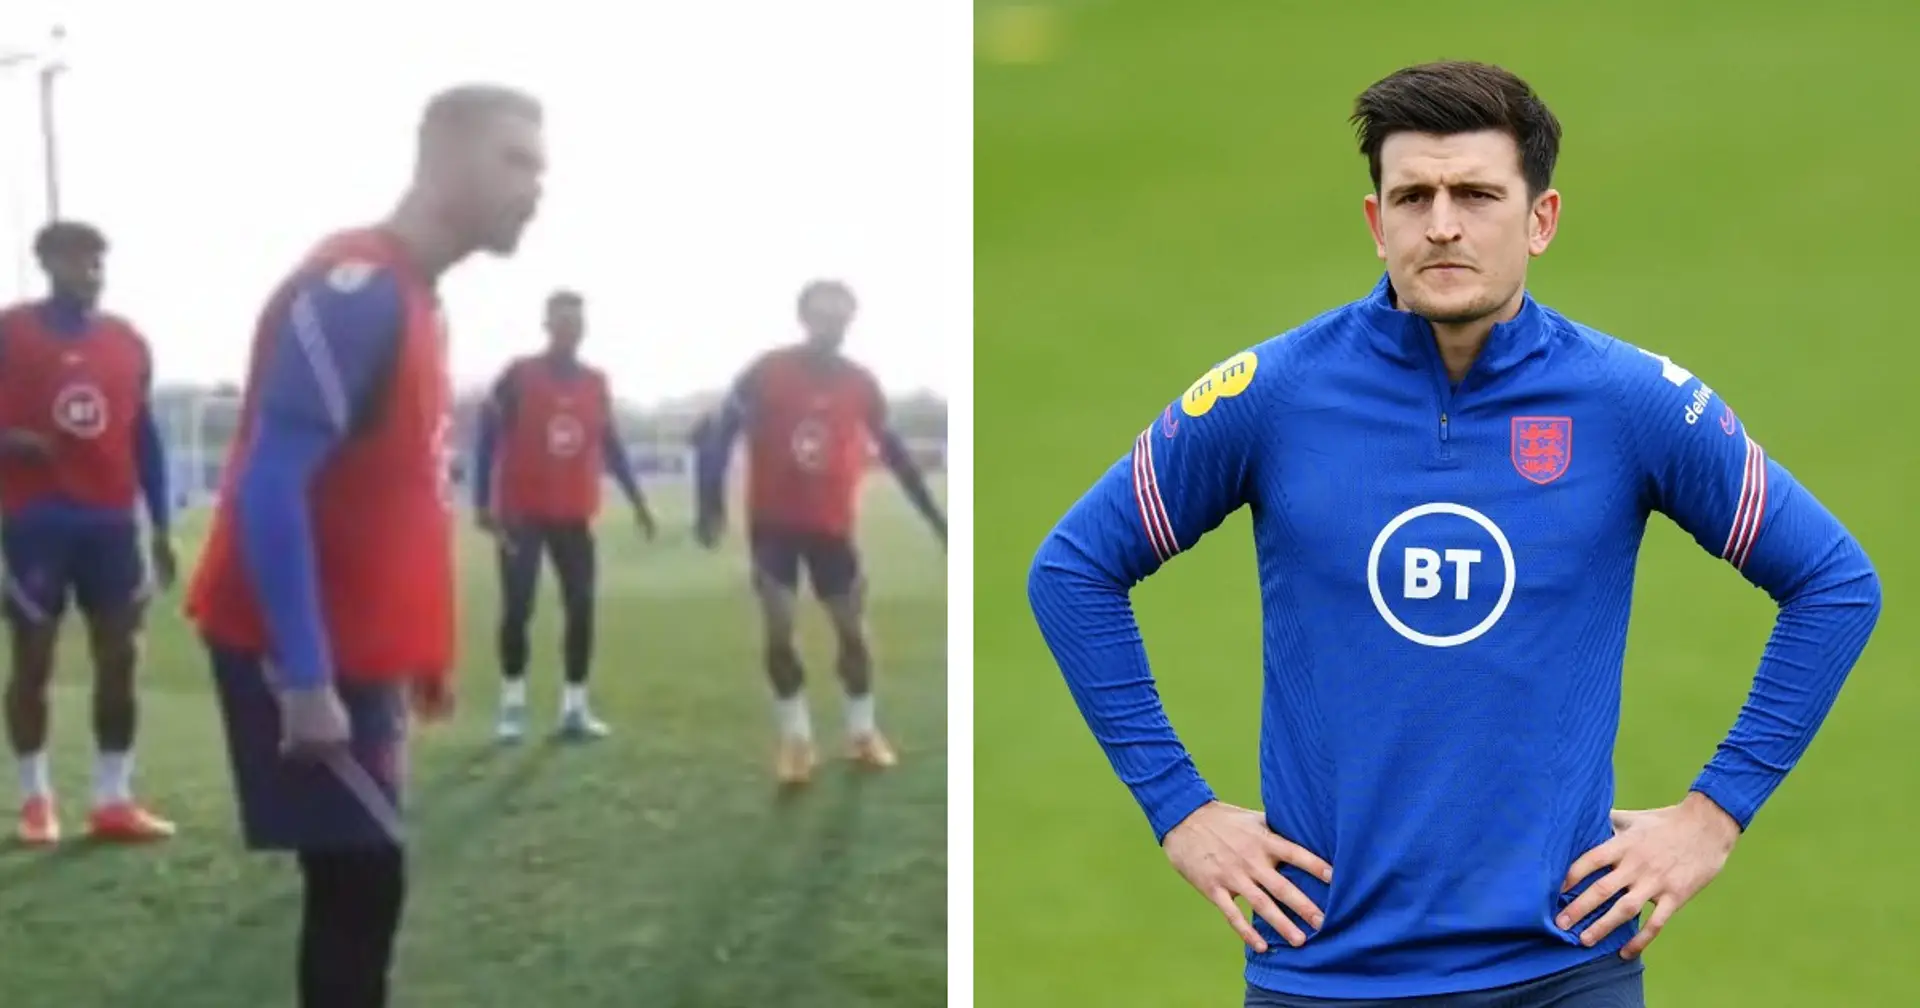 'What are you doing?': Jordan Henderson baffled by Harry Maguire during England training